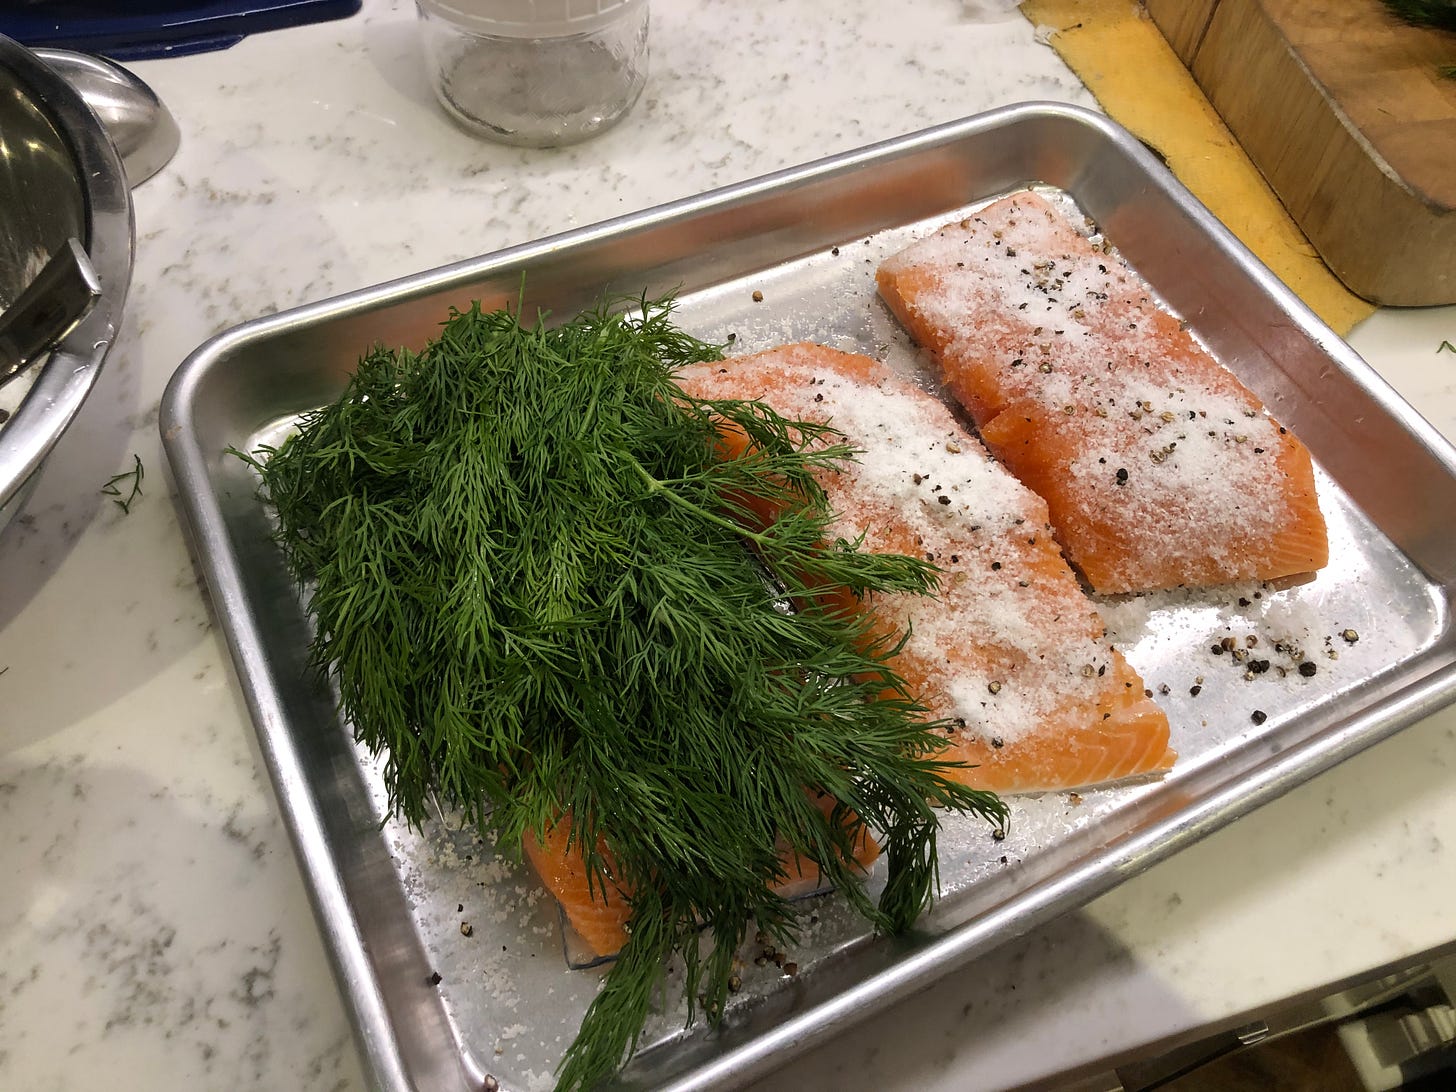 The salmon pieces, covered in the cure. One piece also has a large pile of dill on it, covering it completely.